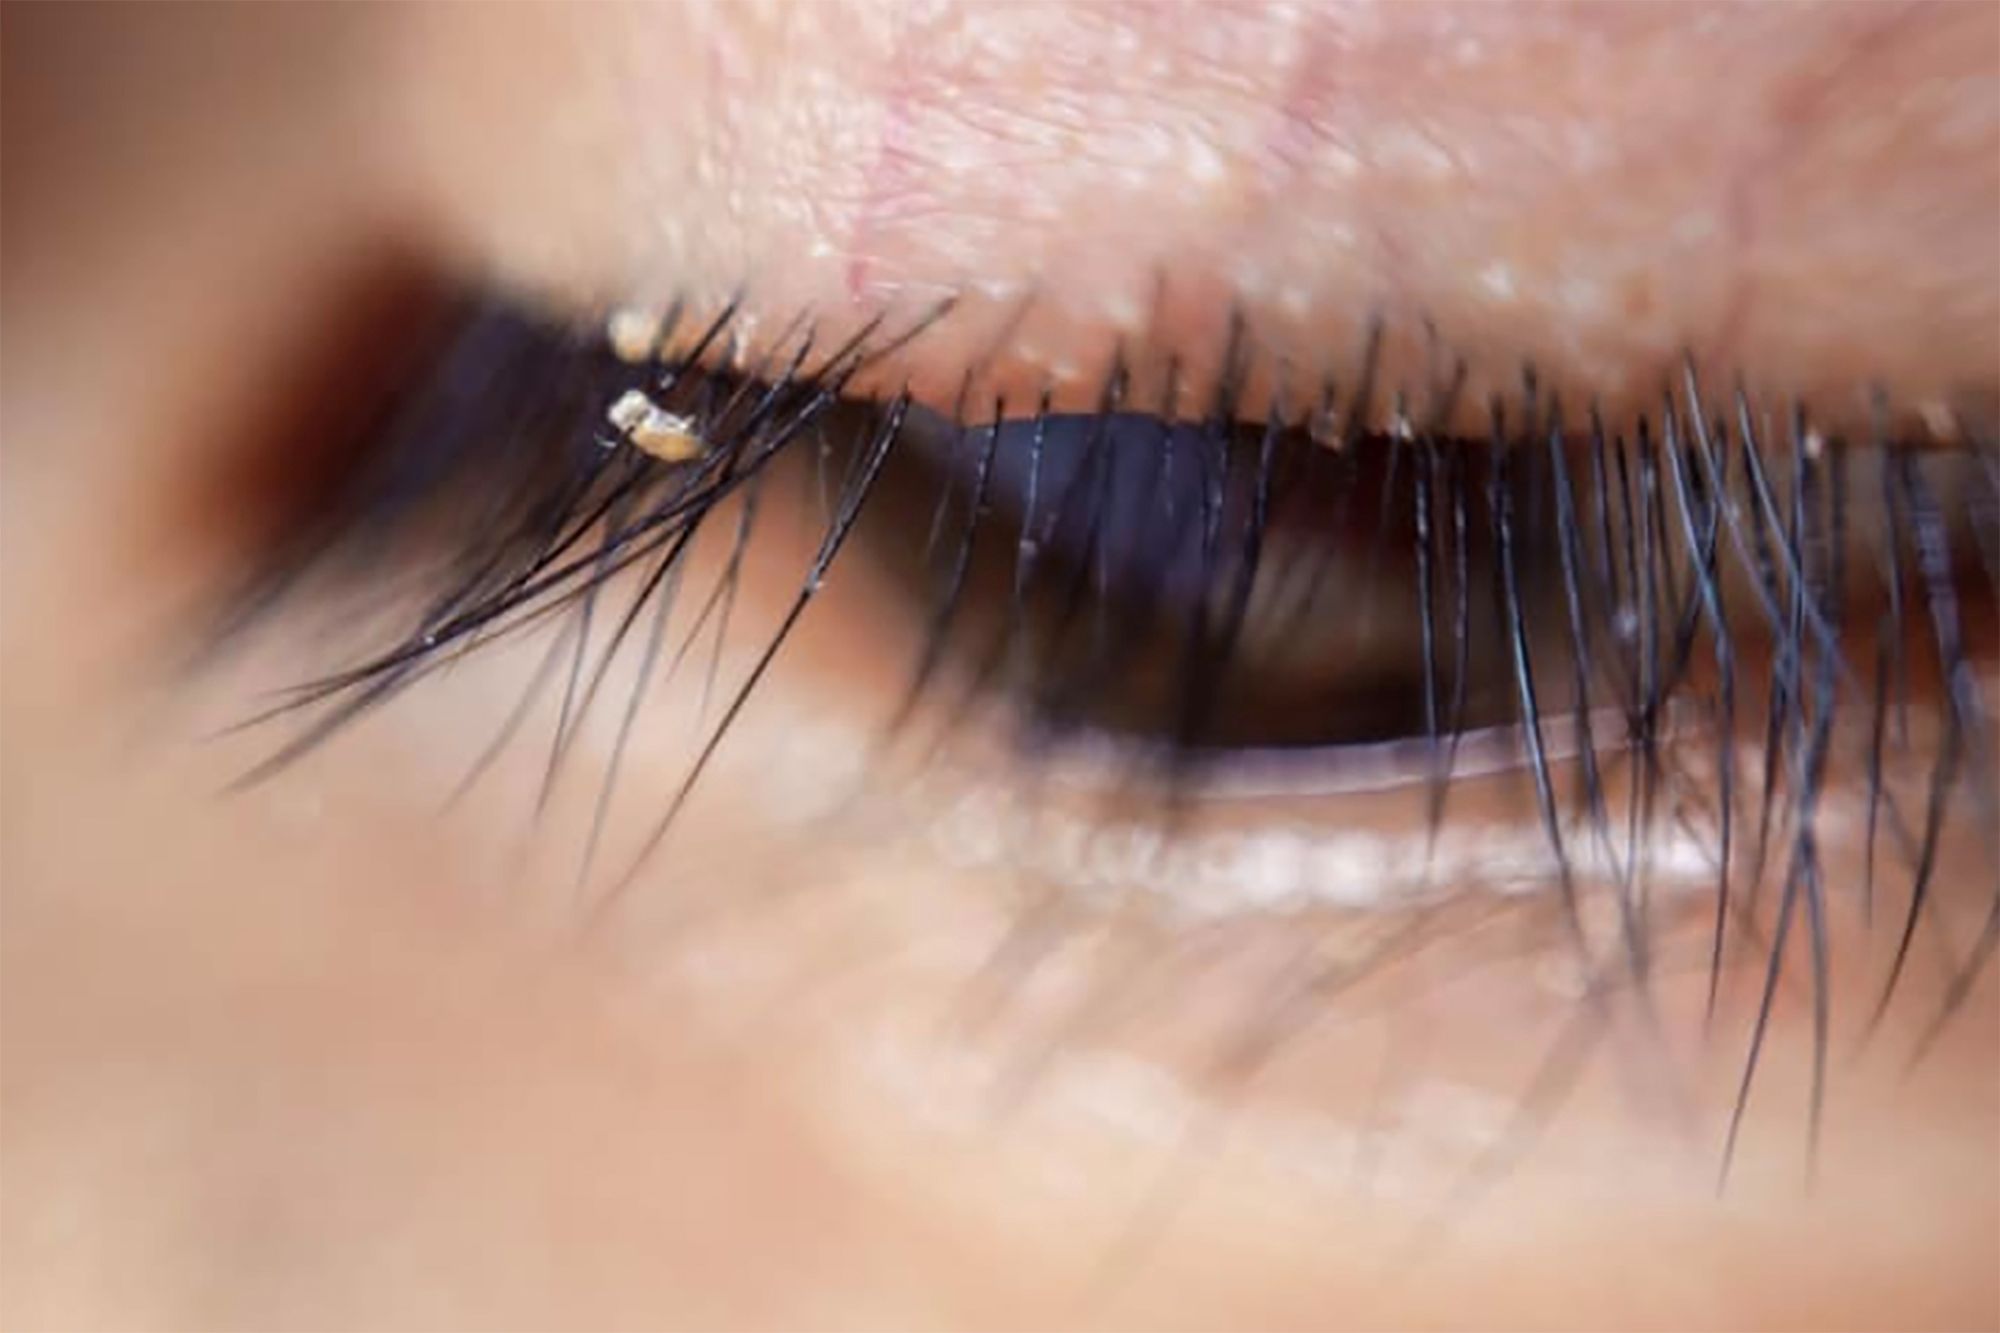 Itching and redness in eyes can be the symptoms of eyelash lice: